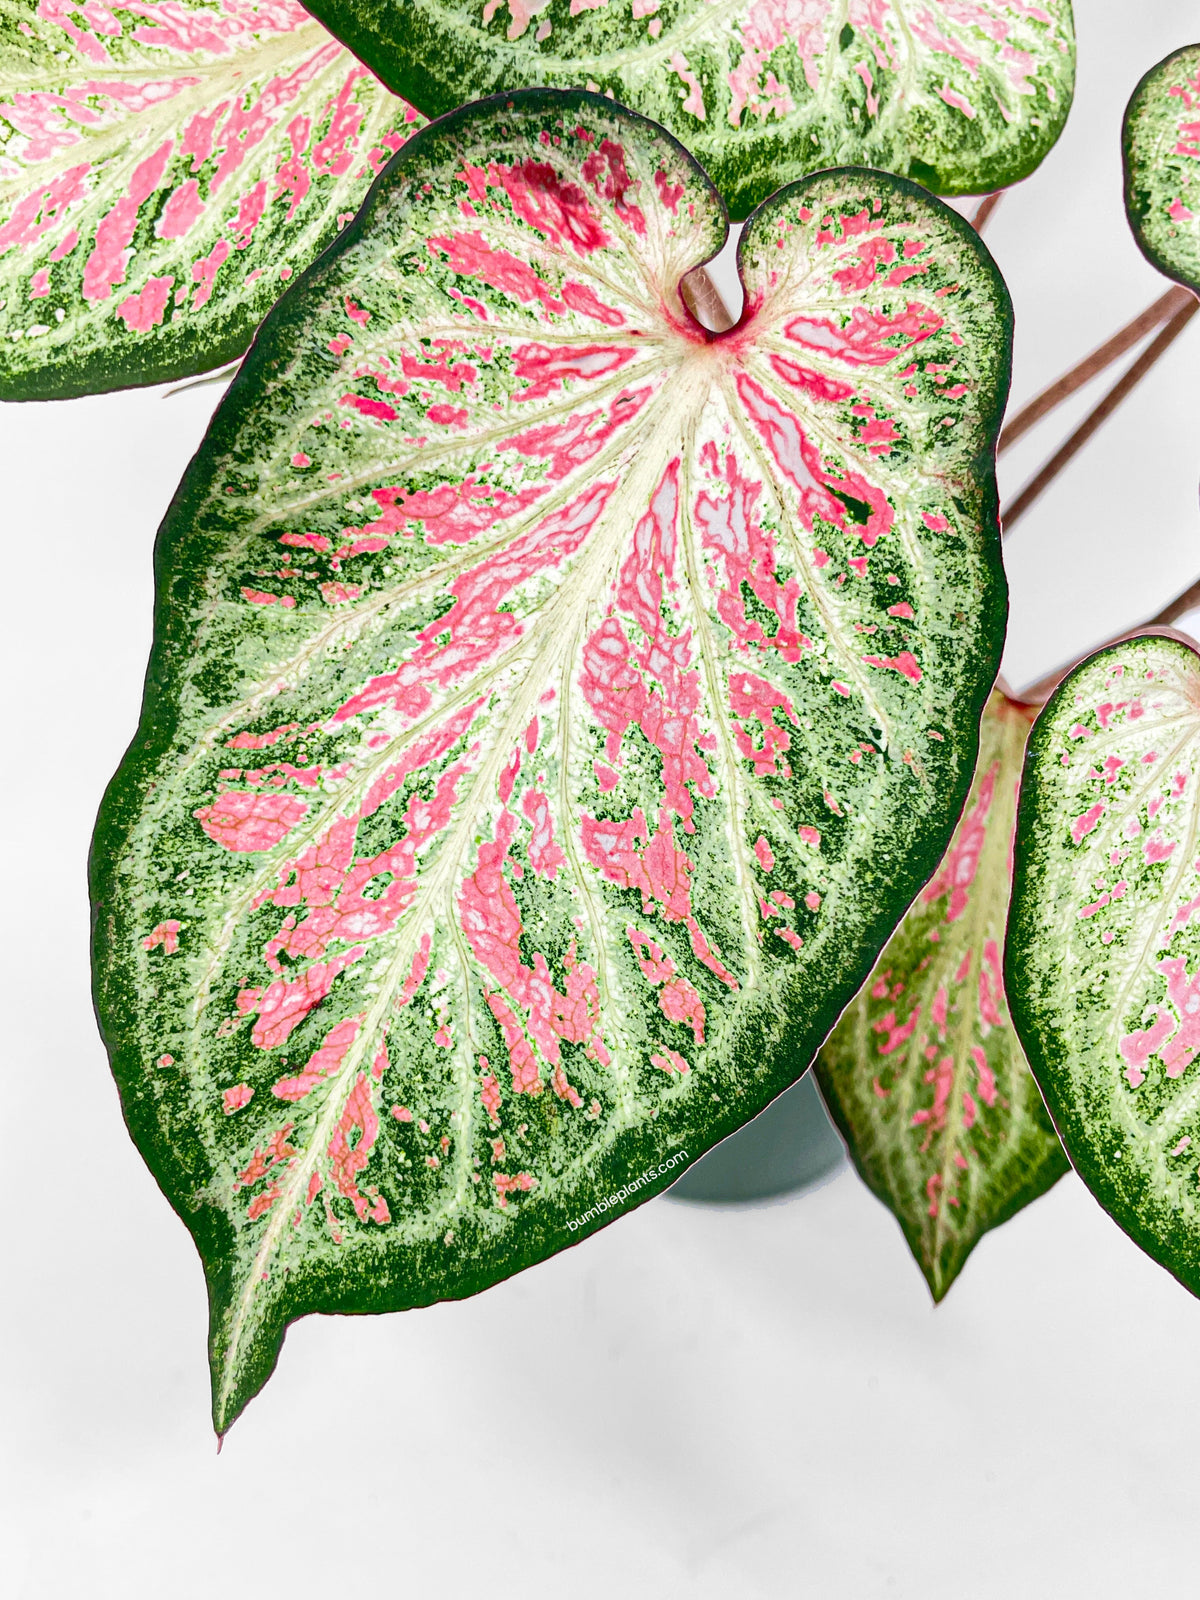 Caladium Candyland Pink & Green Angel Wings by Bumble Plants